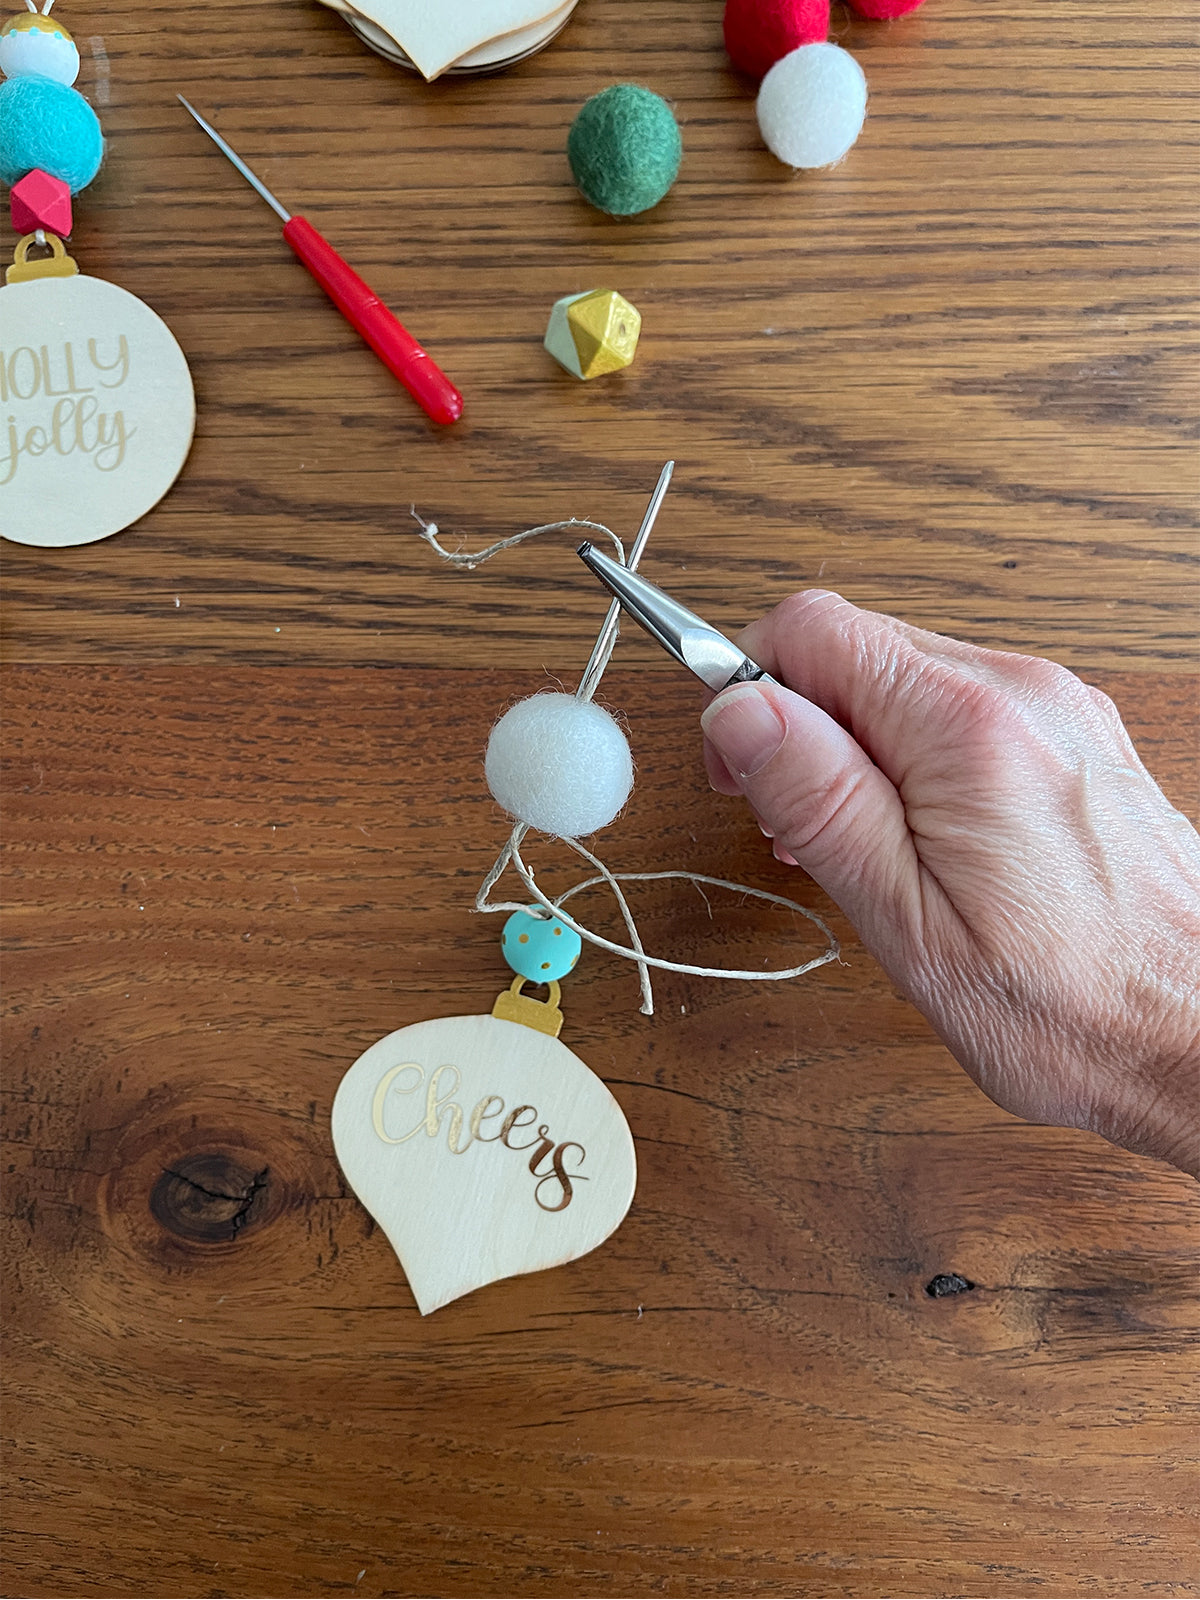  Five DIY holiday project ideas using wool felt balls by Make & Merry Co - Christmas Ornaments